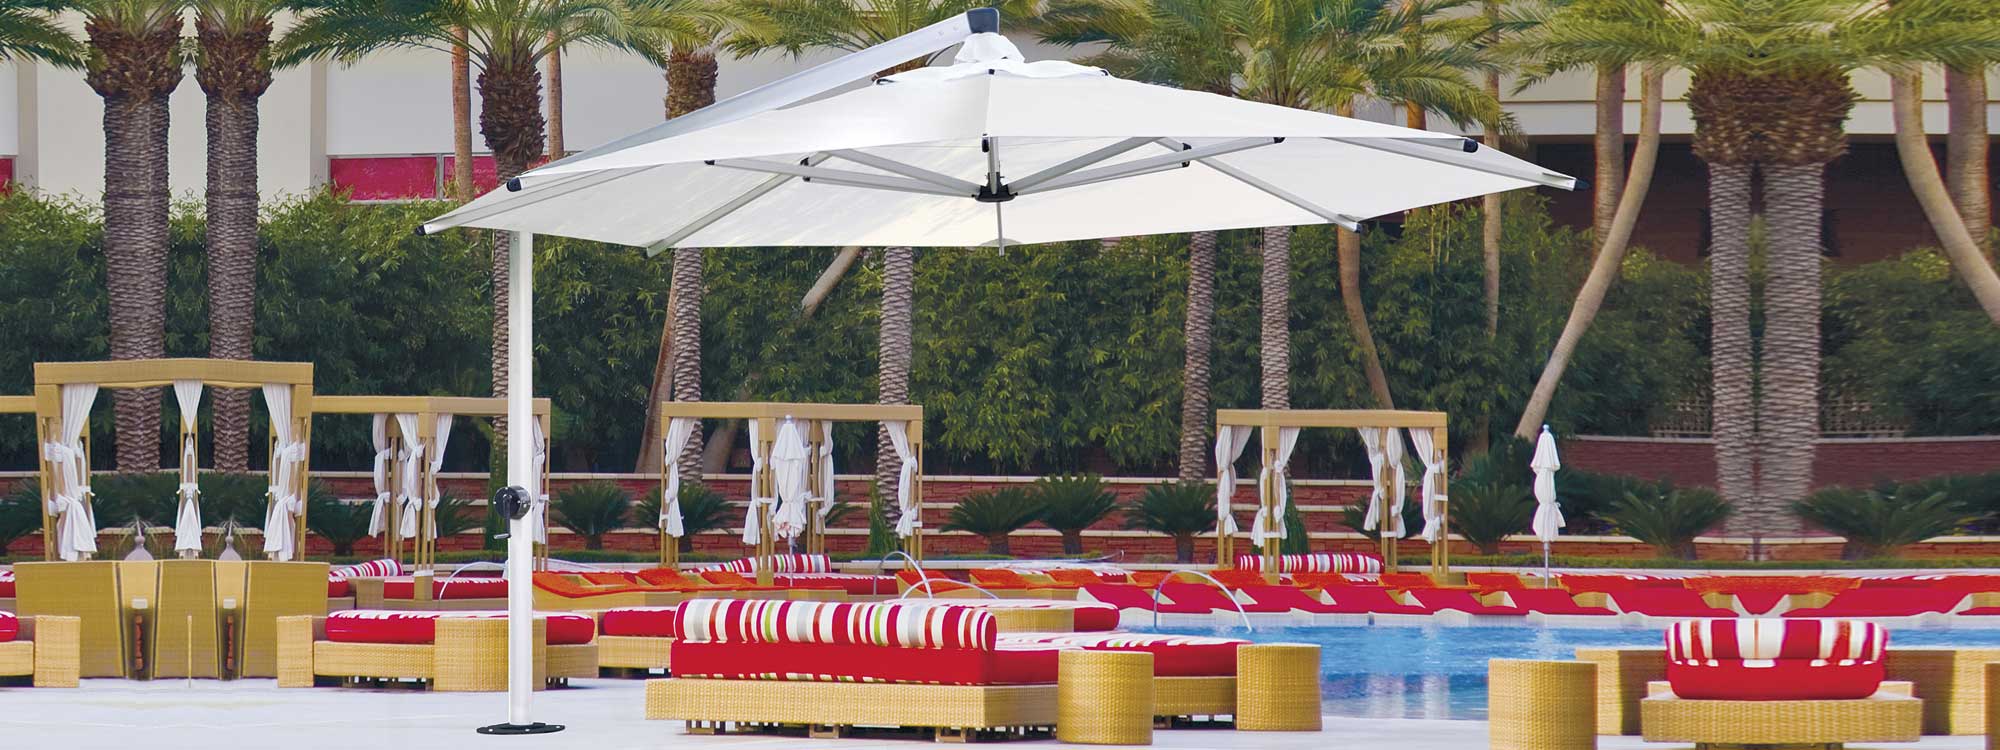 Image of Shademaker Galaxy large white cantilever parasol over outdoor lounge furniture on a hotel poolside